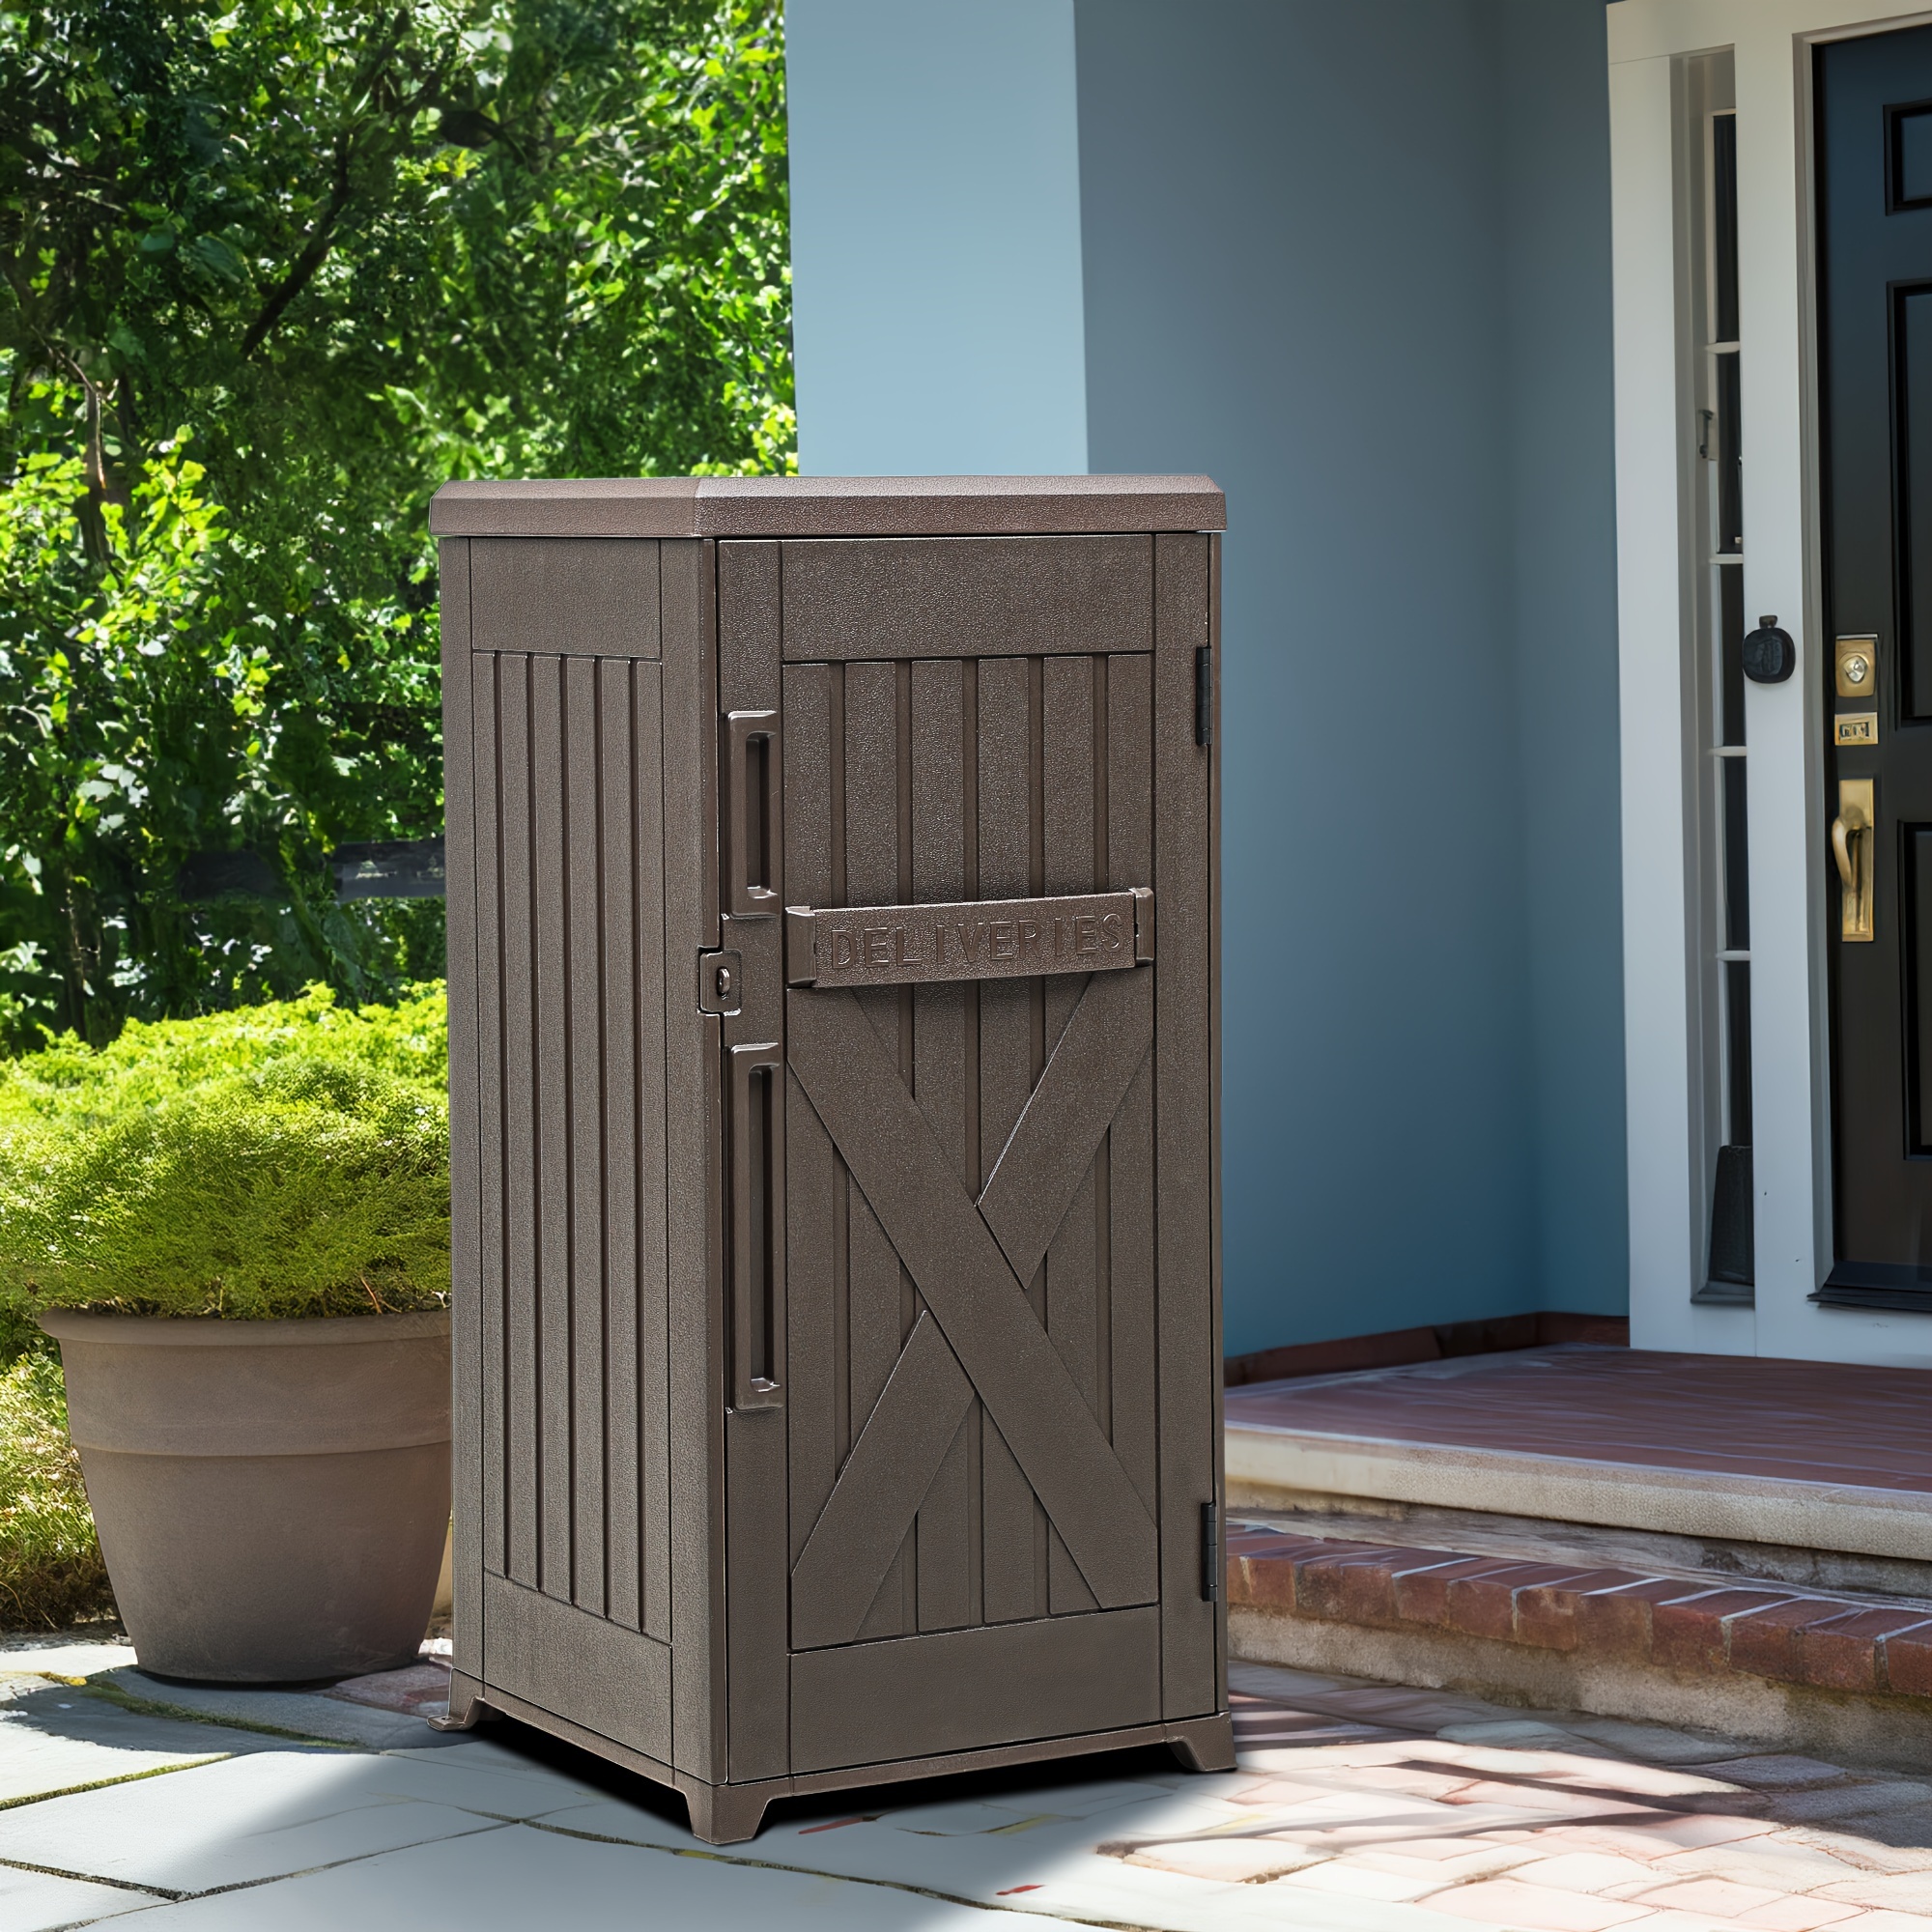 

Homiflex 60 Gallon Large Package Delivery And Storage Box With Lockable Secure, Double-wall Resin Outdoor Waterproof Deck Box For Porch, Curbside, 8.5 Cubic Feet, Brown